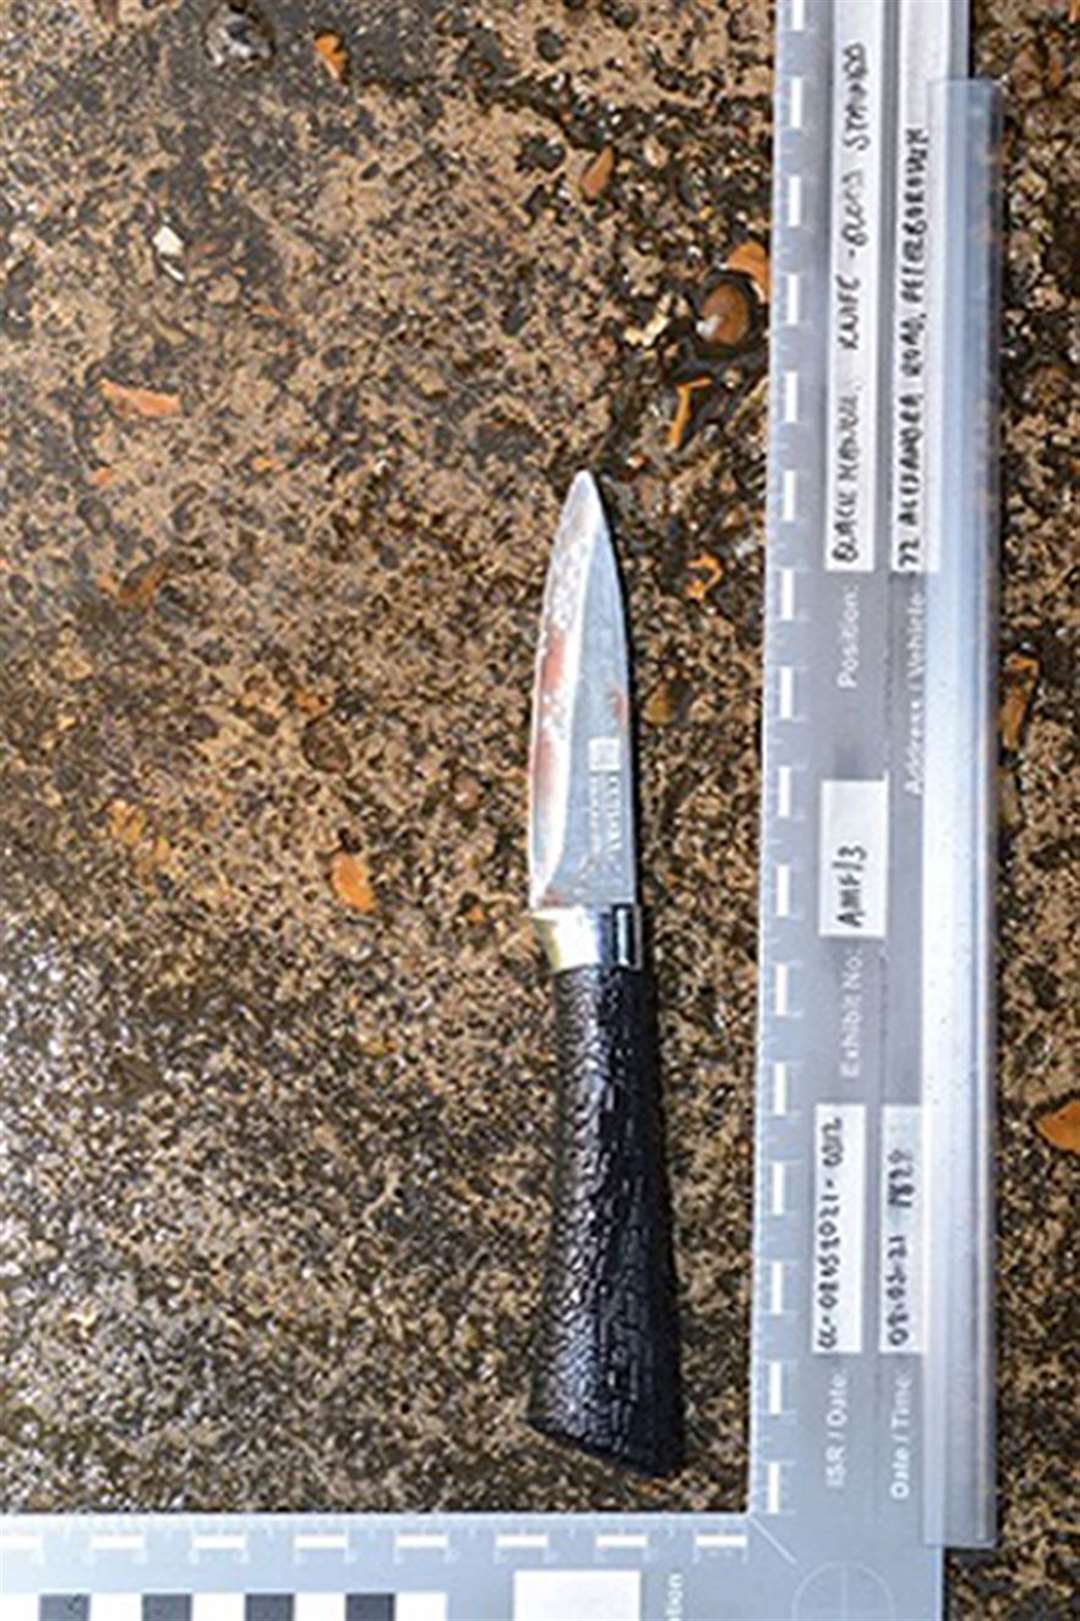 The knife used by Faisal Khan, who stabbed a nine-year-old boy in the face, head and hands in a random attack in the street (Cambridgeshire Police/PA)